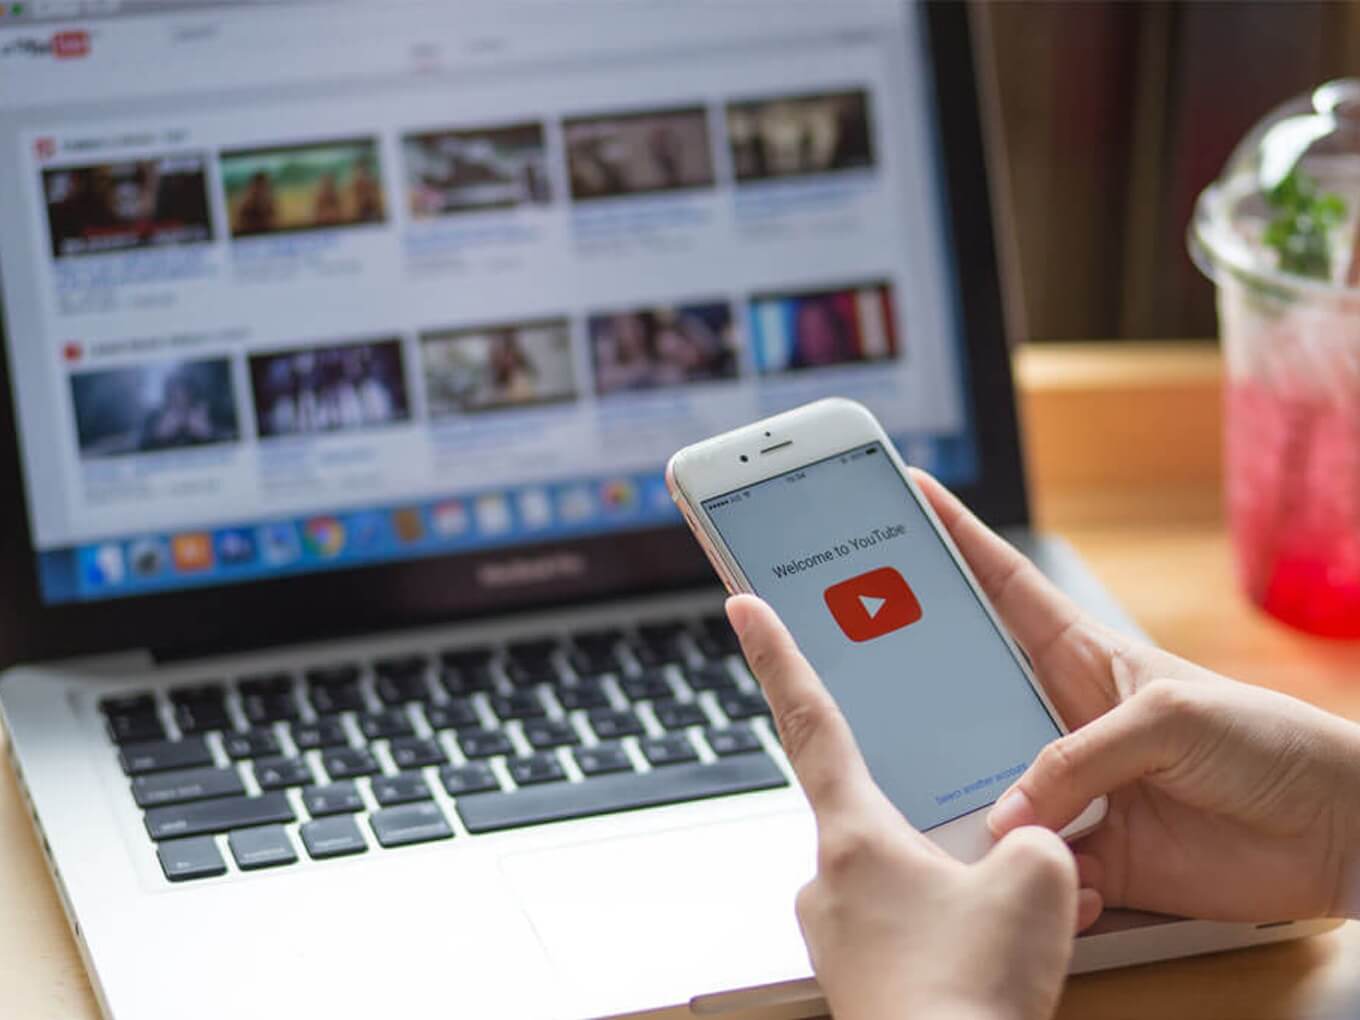 YouTube Claims Staggering Growth In Vernacular Content Consumption